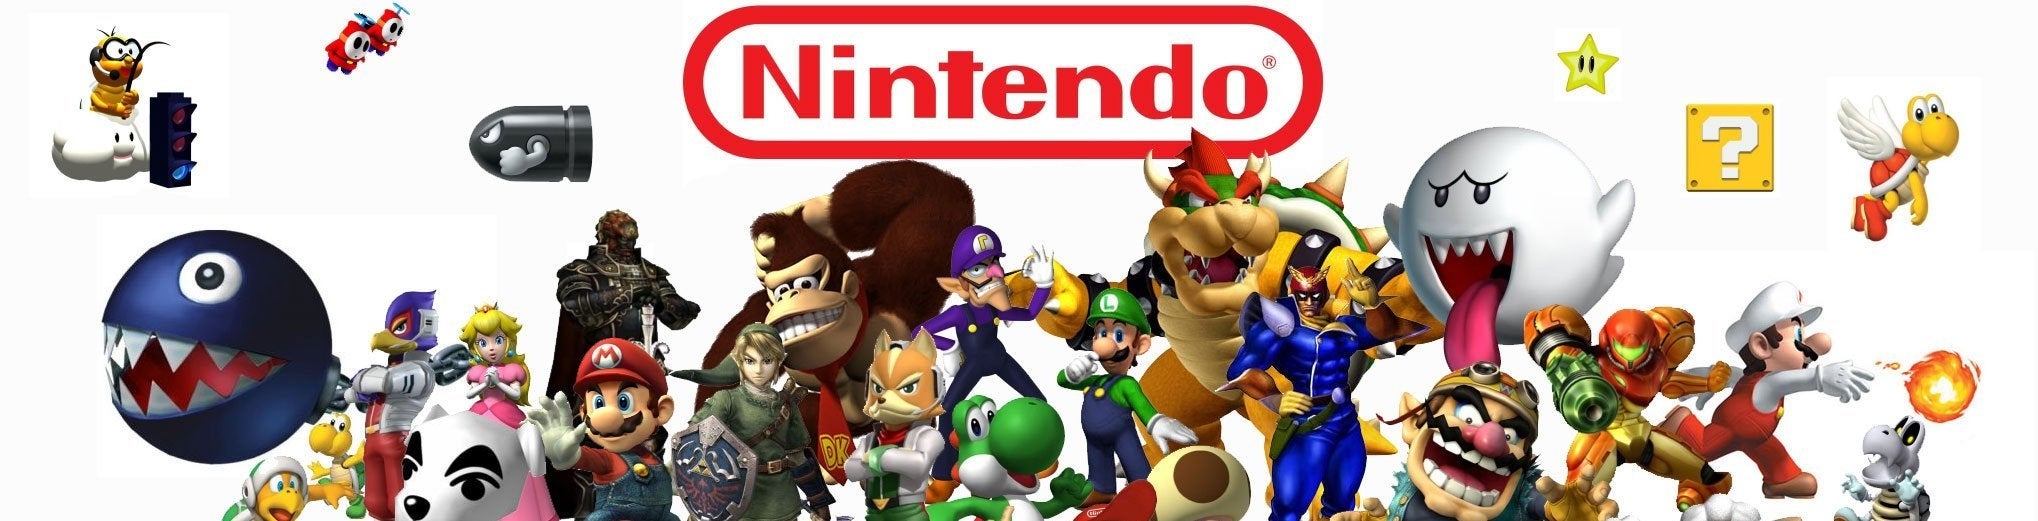 Image for Nintendo's new boss faces the most pivotal year in the company's history